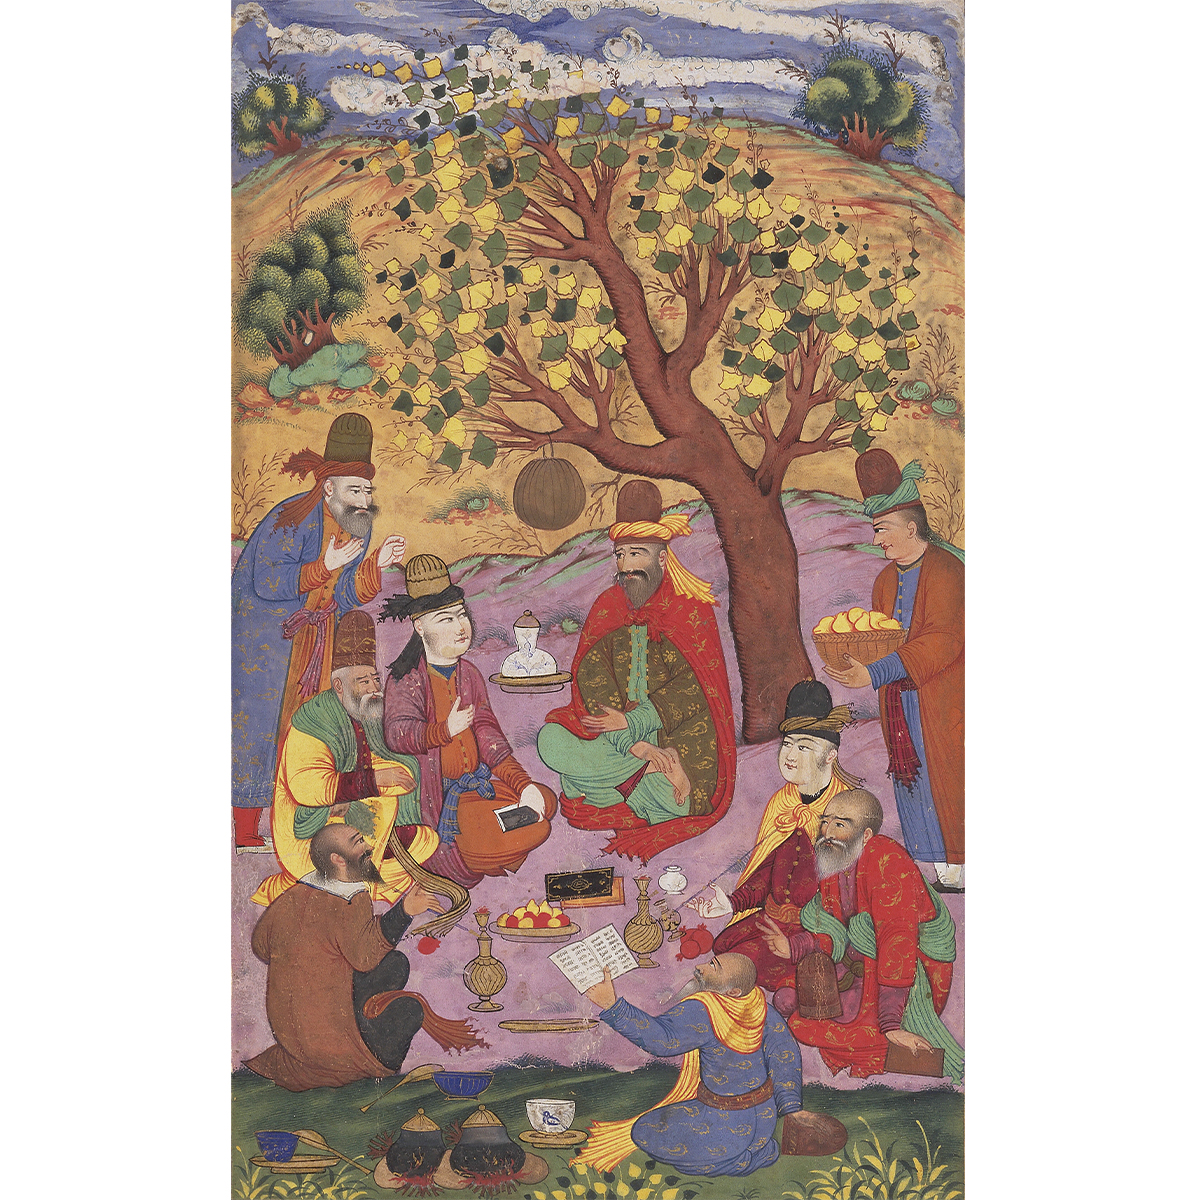 Painting of a gathering of men sitting beneath a tree